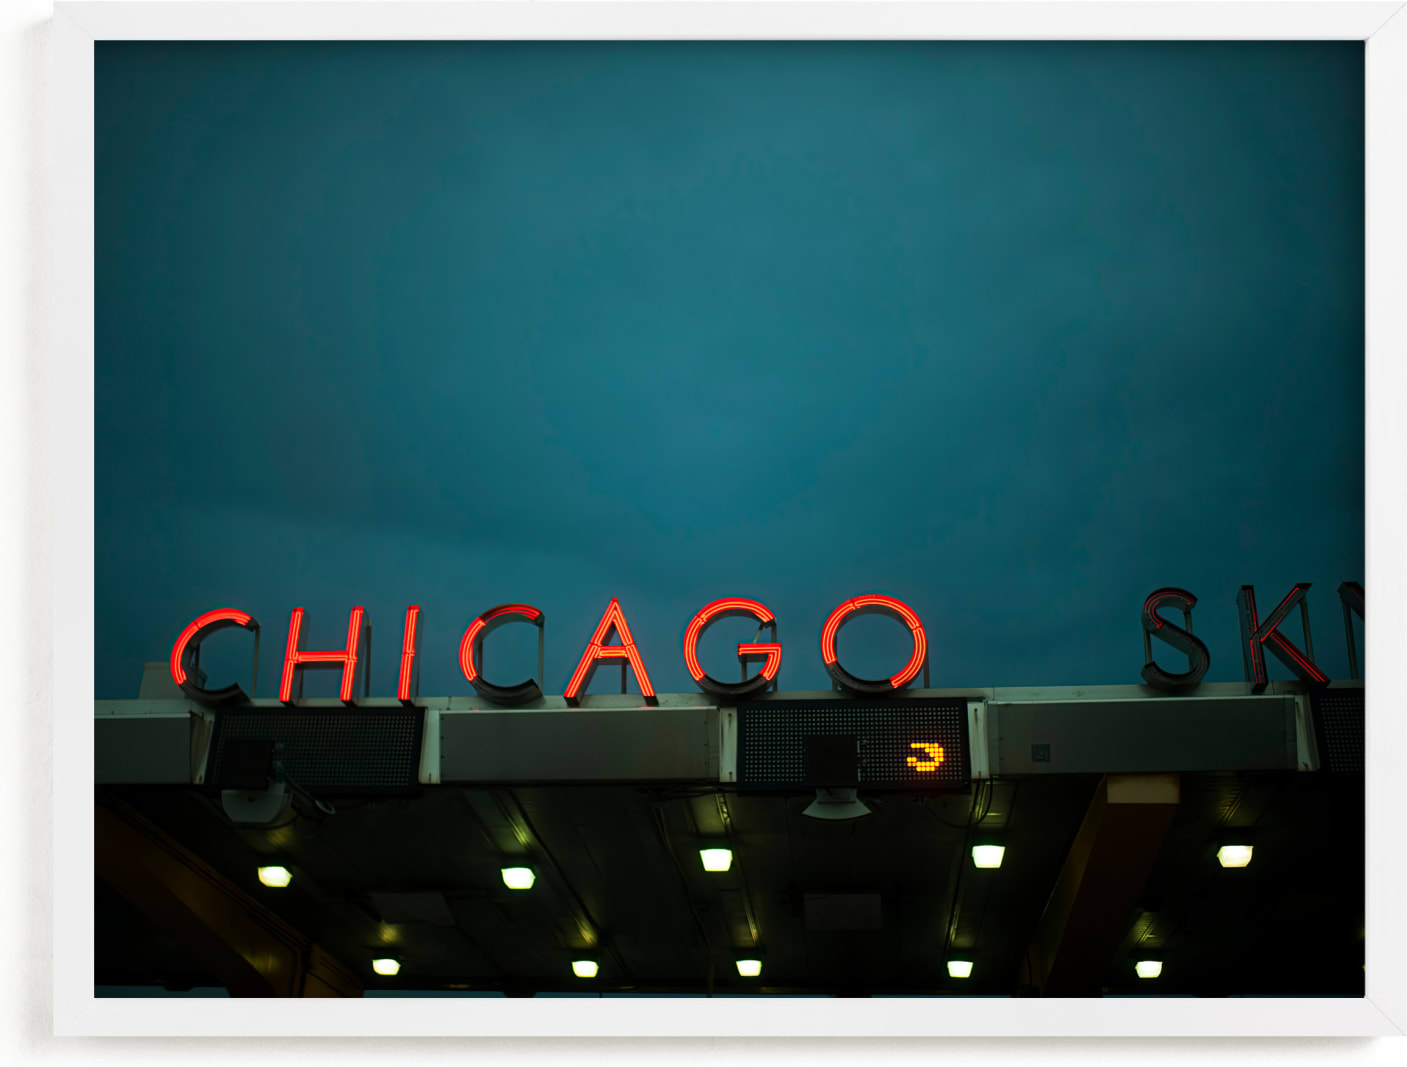 This is a blue art by E Melko called Chicago Sky.